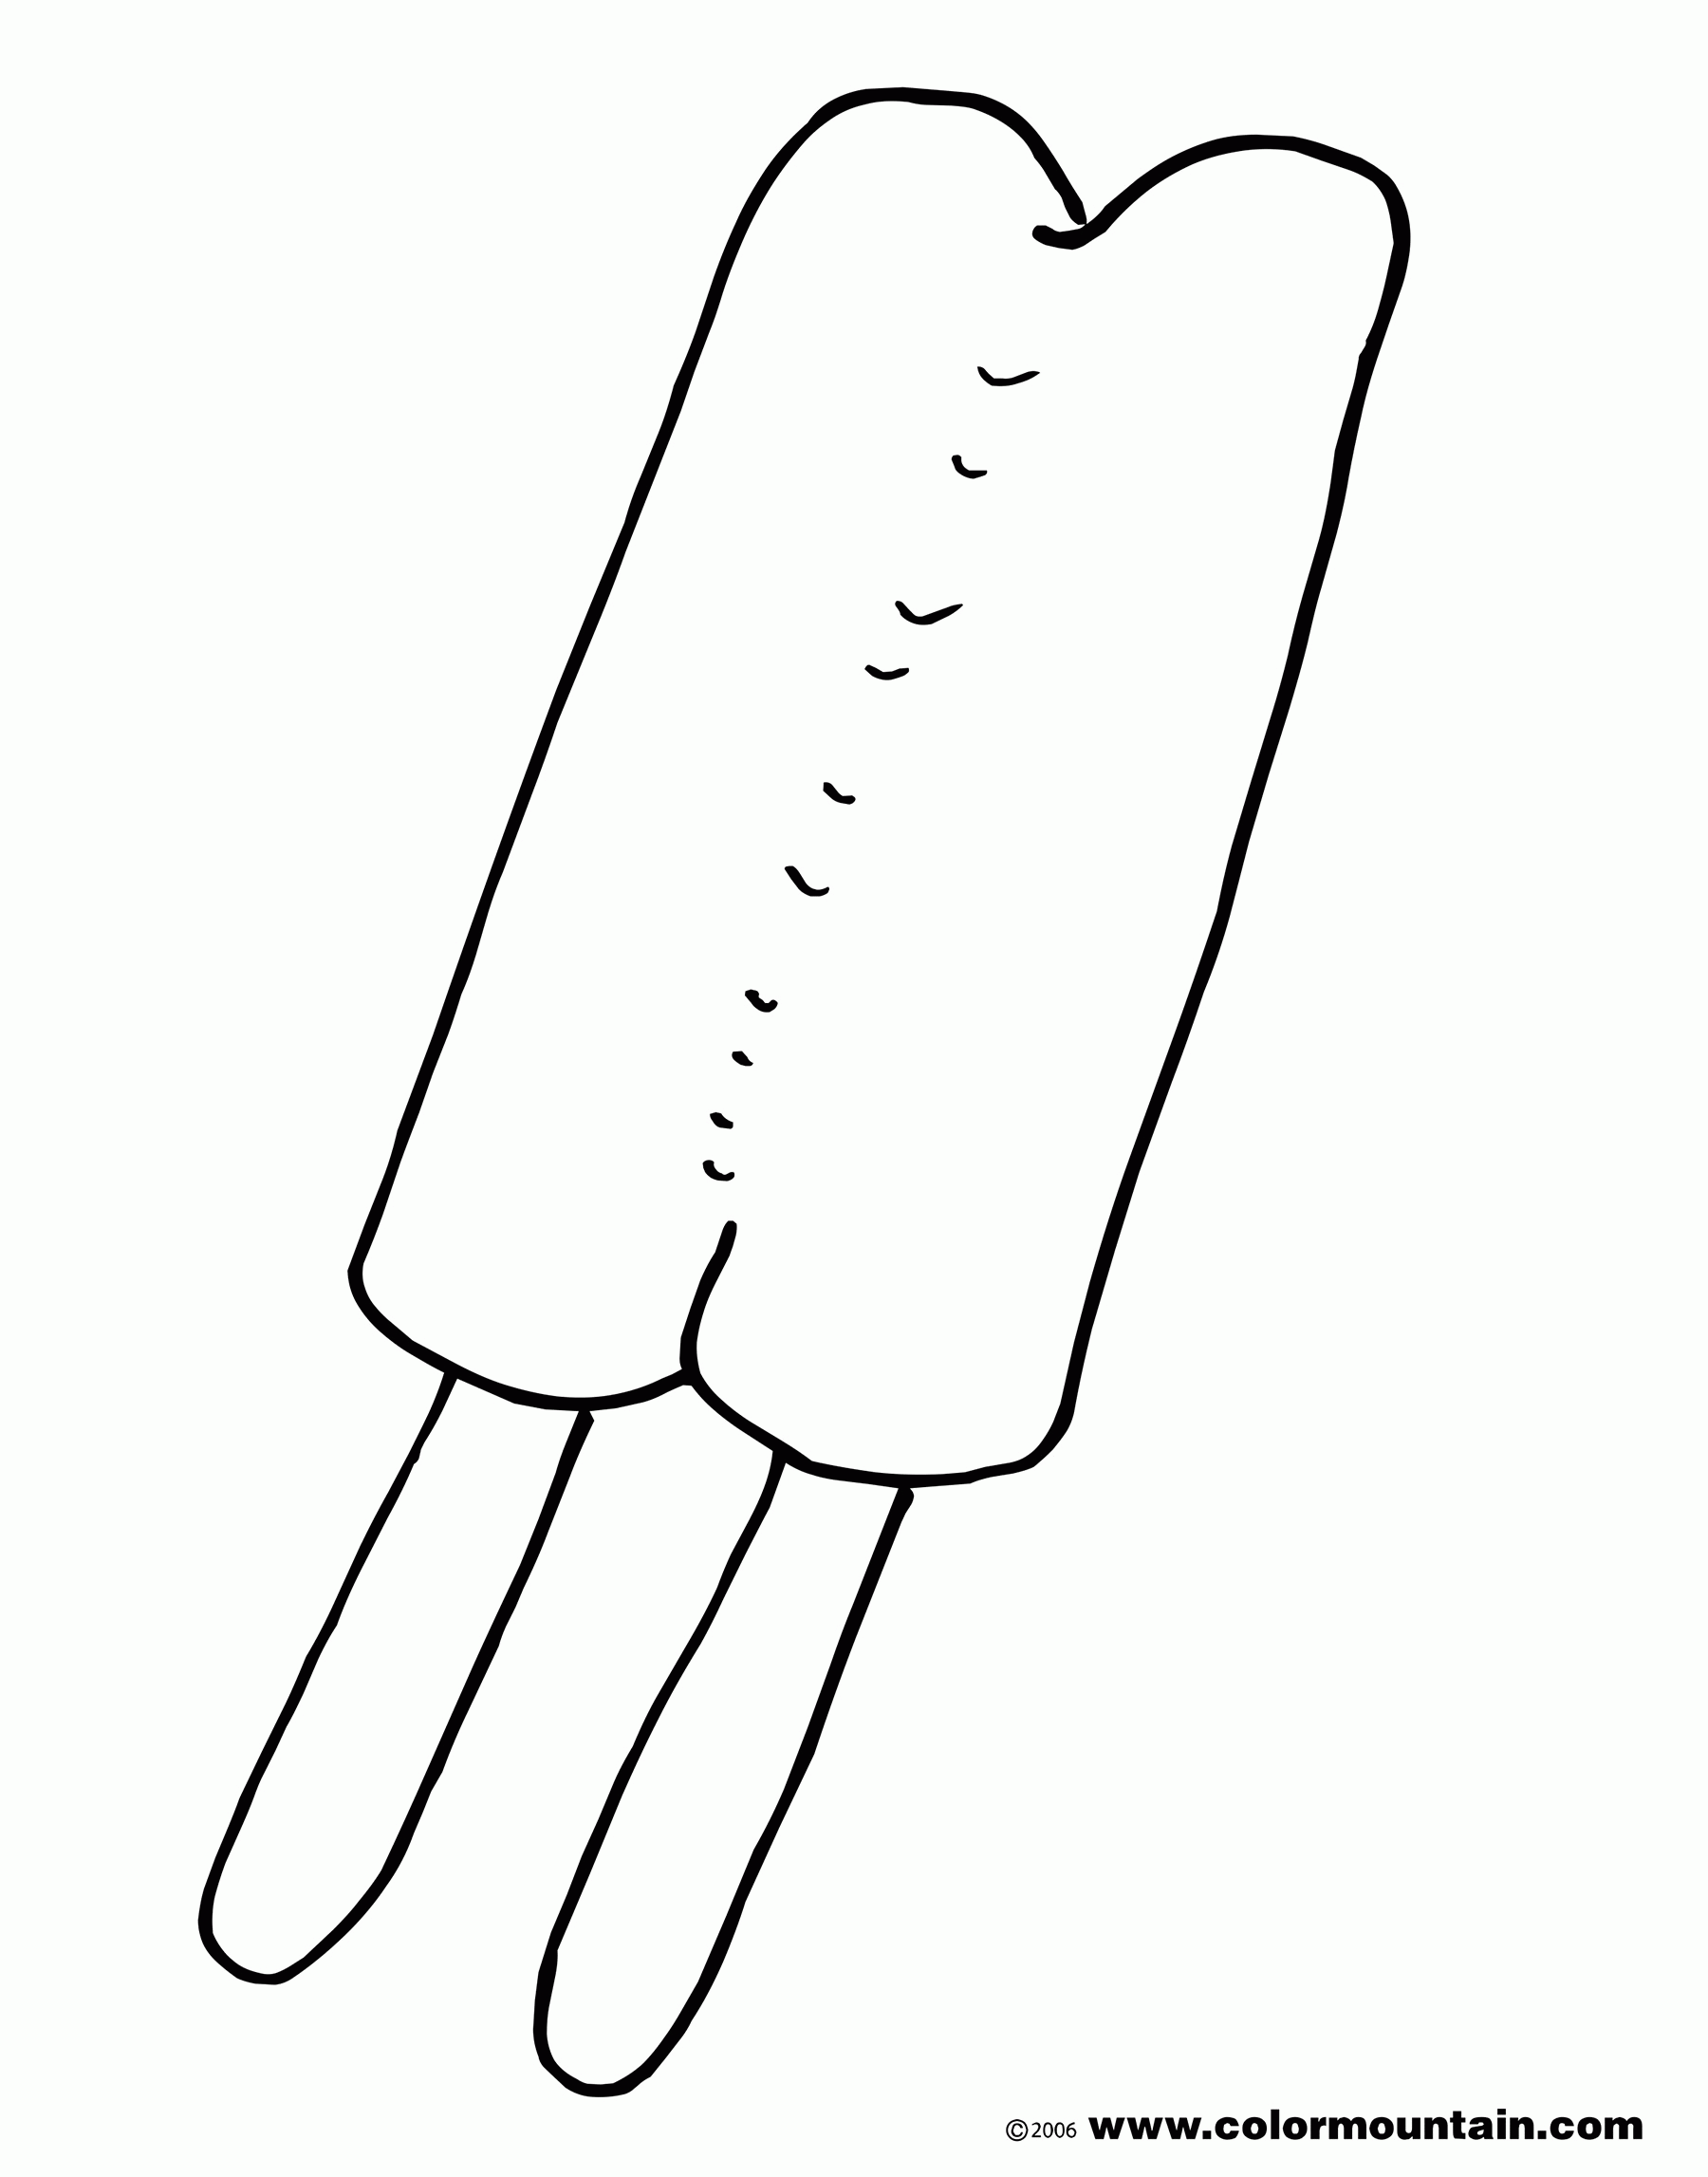 popsicle coloring page coloring sheets popsicles and coloring on pinterest popsicle coloring page 